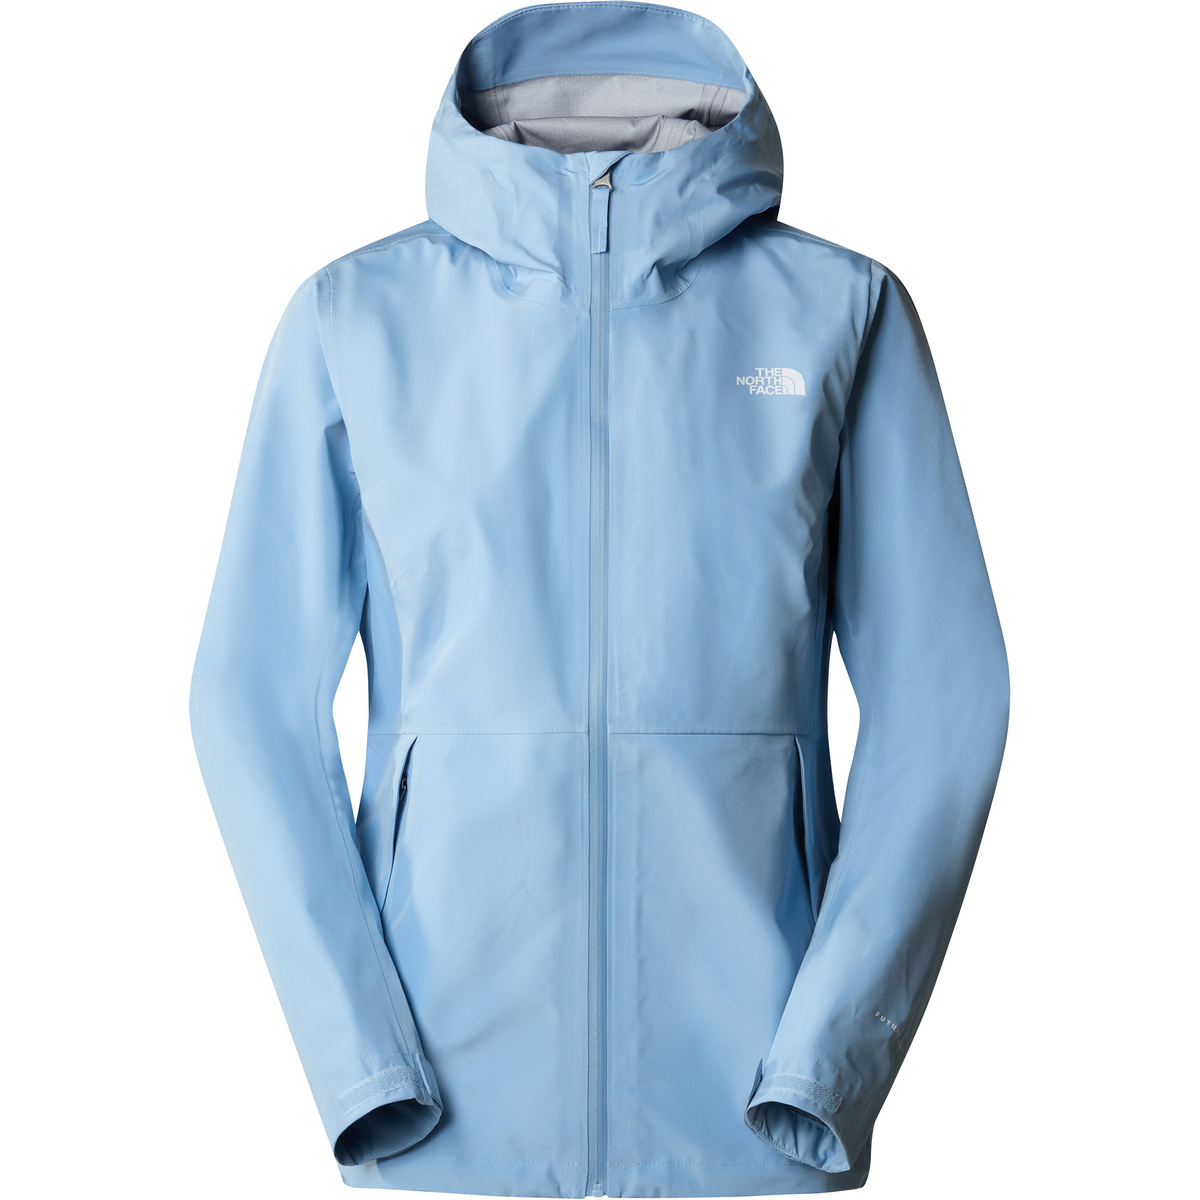 Image of The North Face Donna Giacca Dryzzle Futurelight